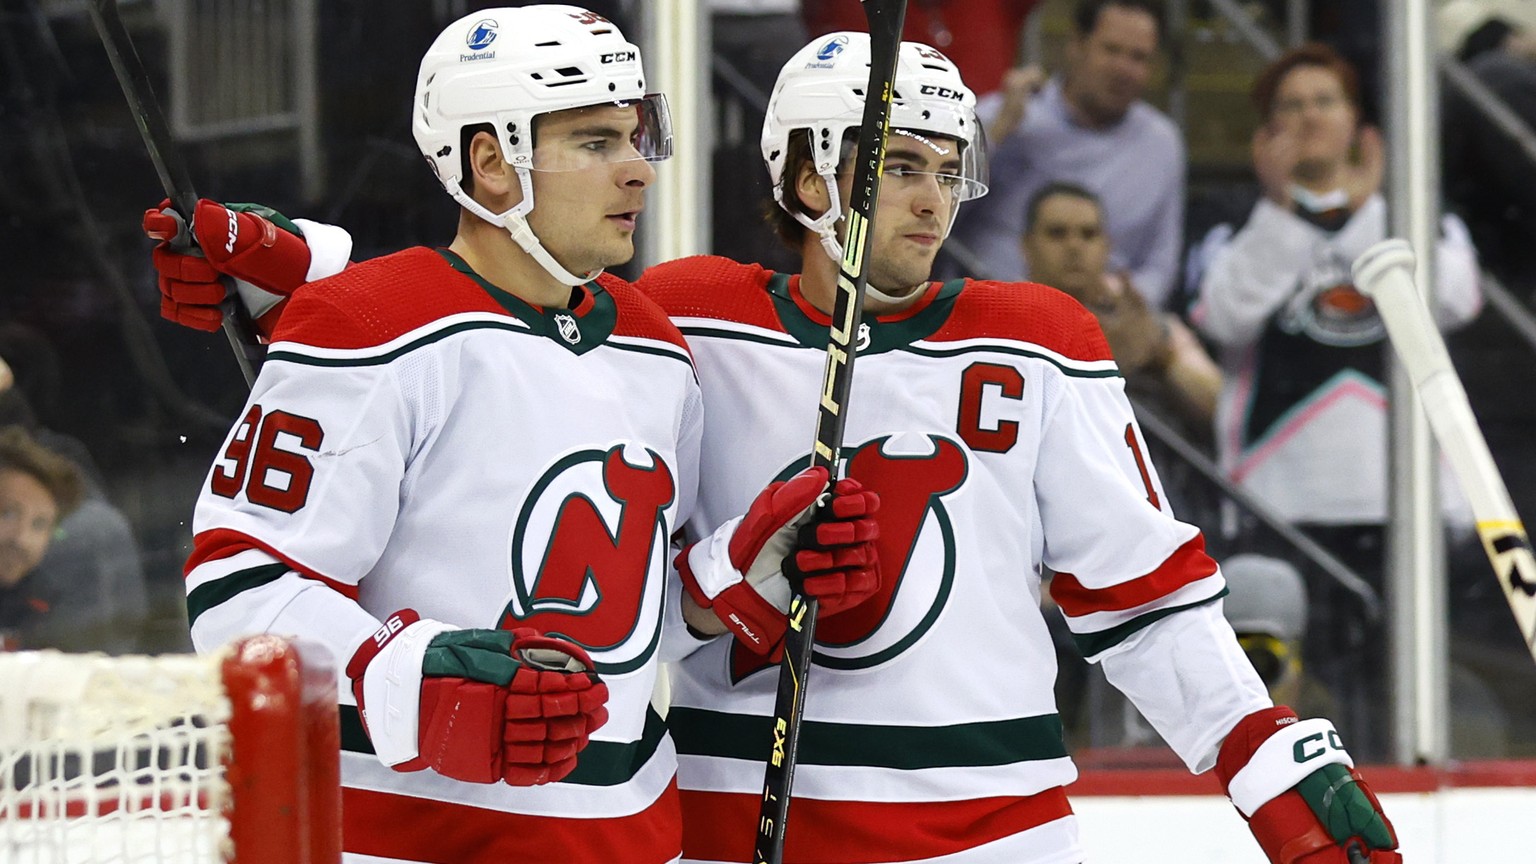 New Jersey Devils right wing Timo Meier (96) celebrates with center Nico Hischier (13) after scoring a goal against the Pittsburgh Penguins during the second period of an NHL hockey game Tuesday, Apri ...